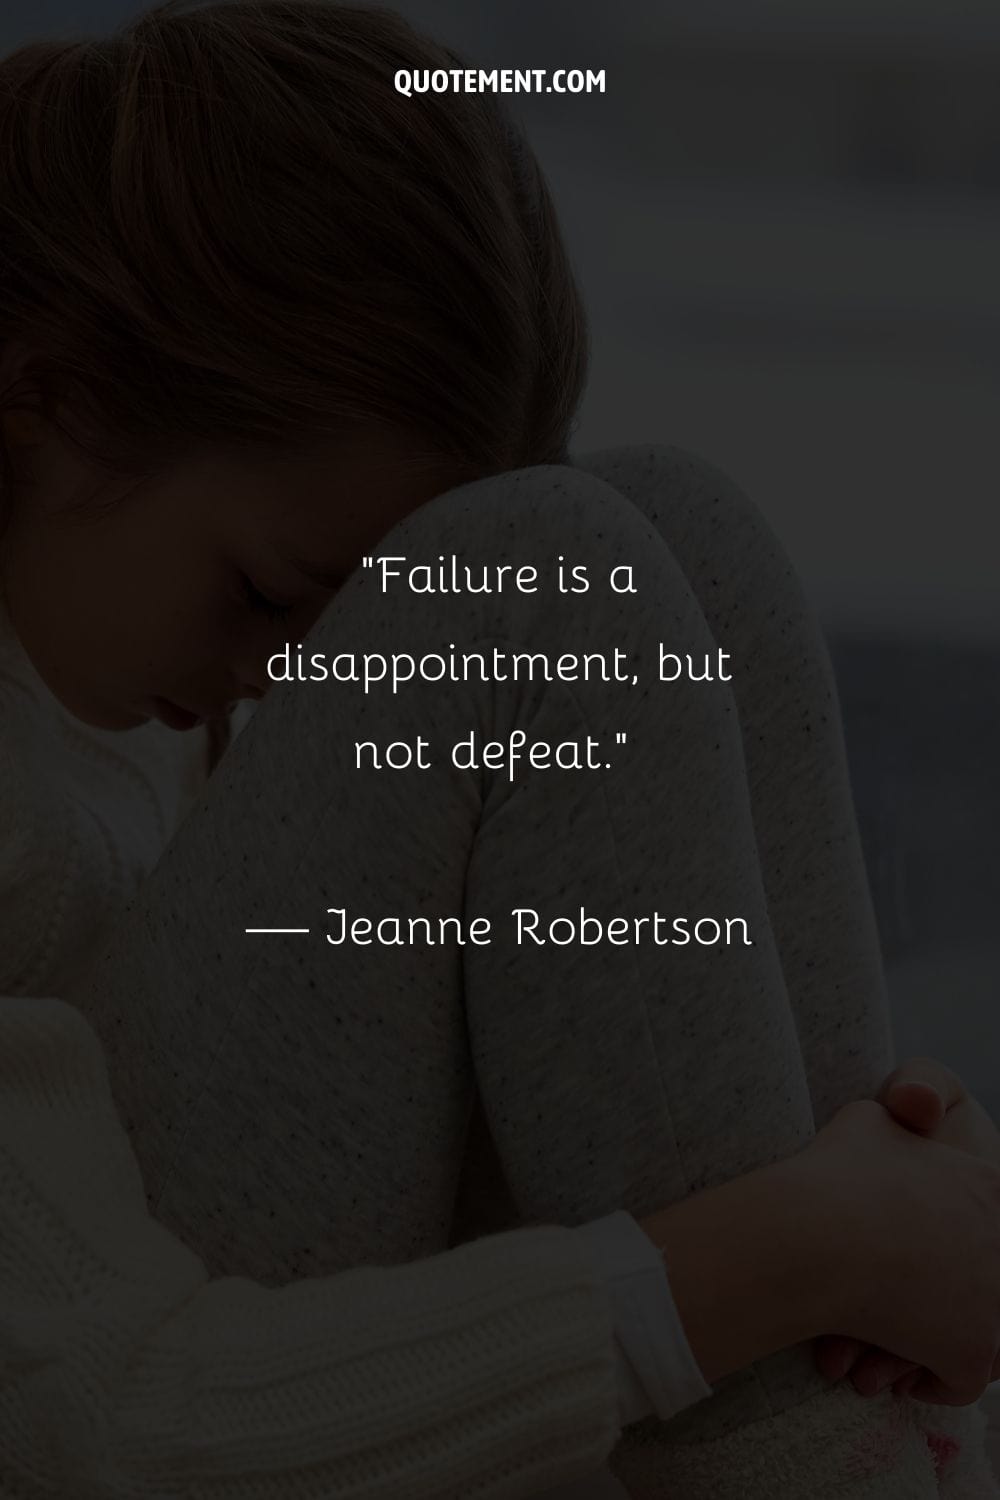 Failure is a disappointment, but not defeat